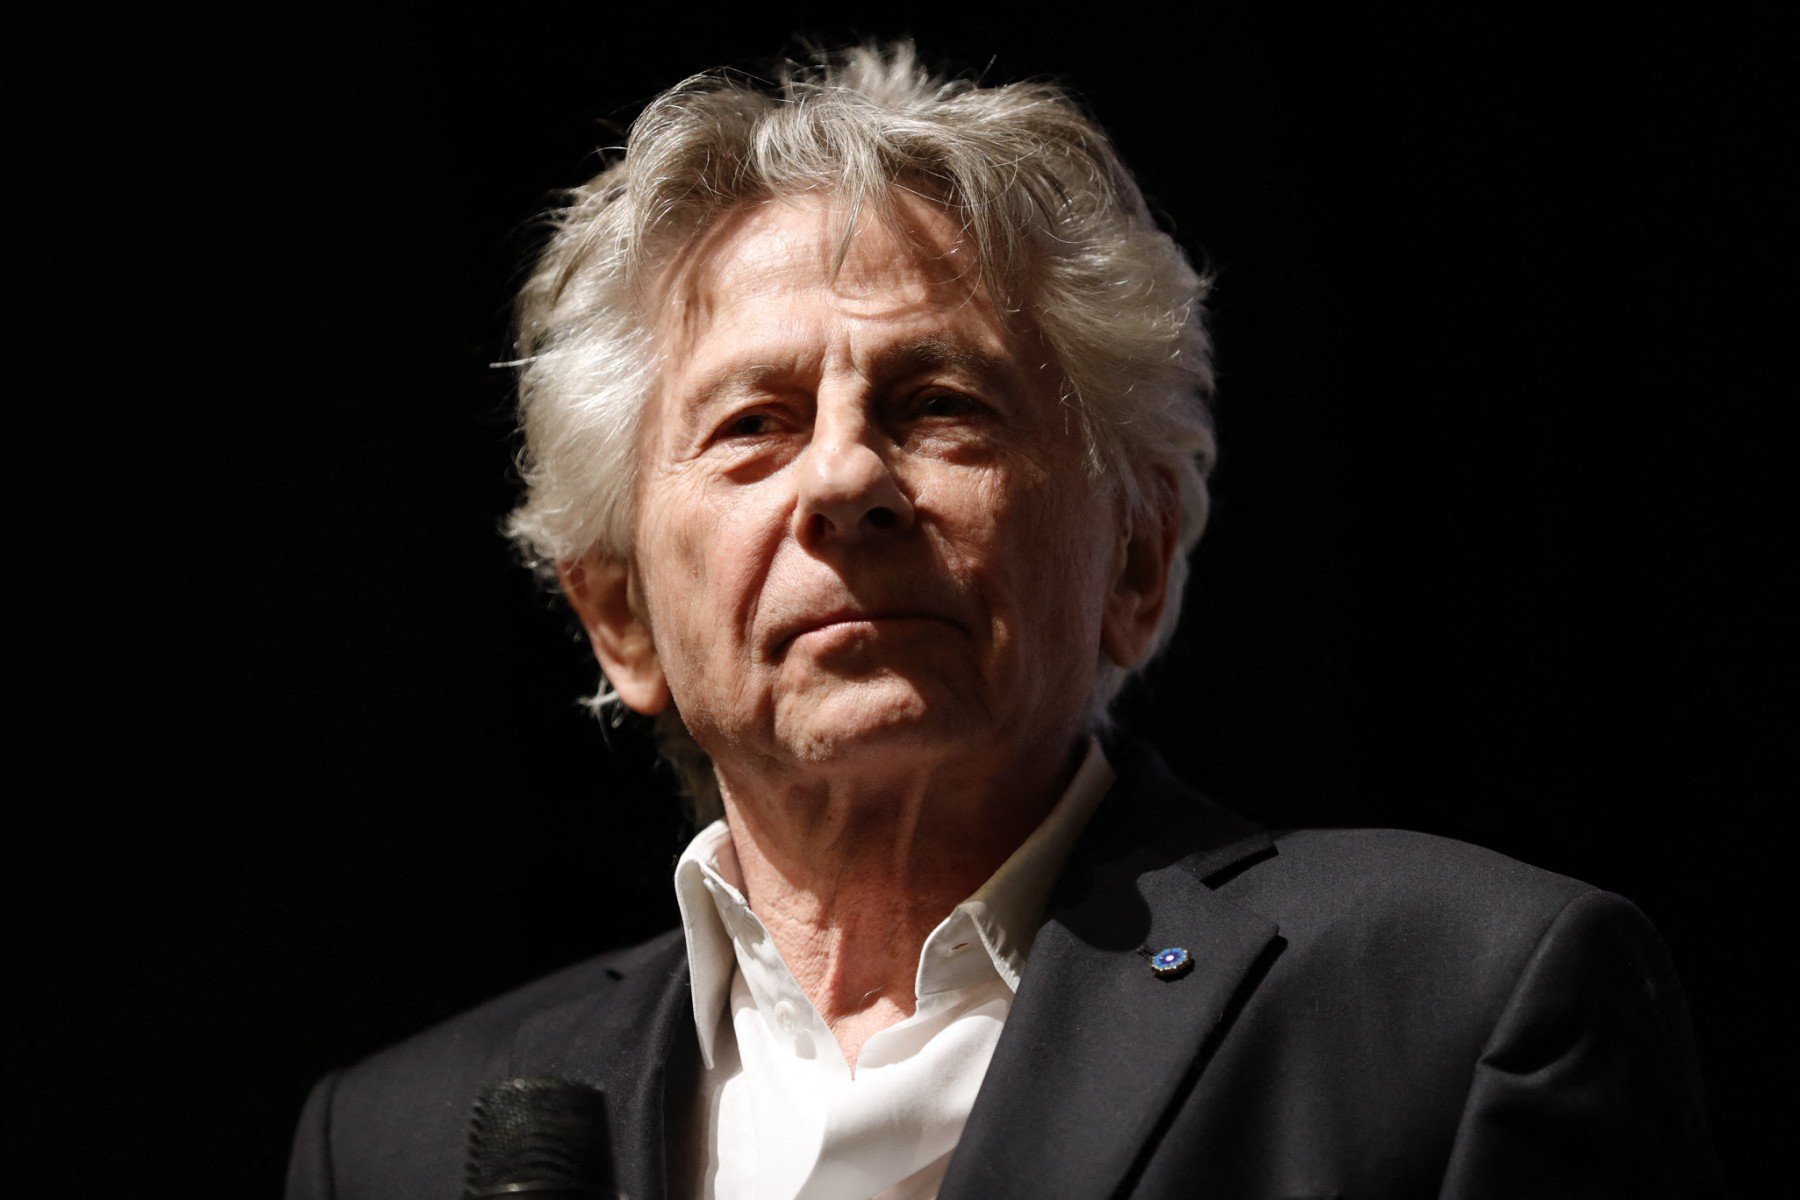 Polanski on trial in France on charge of defaming accuser